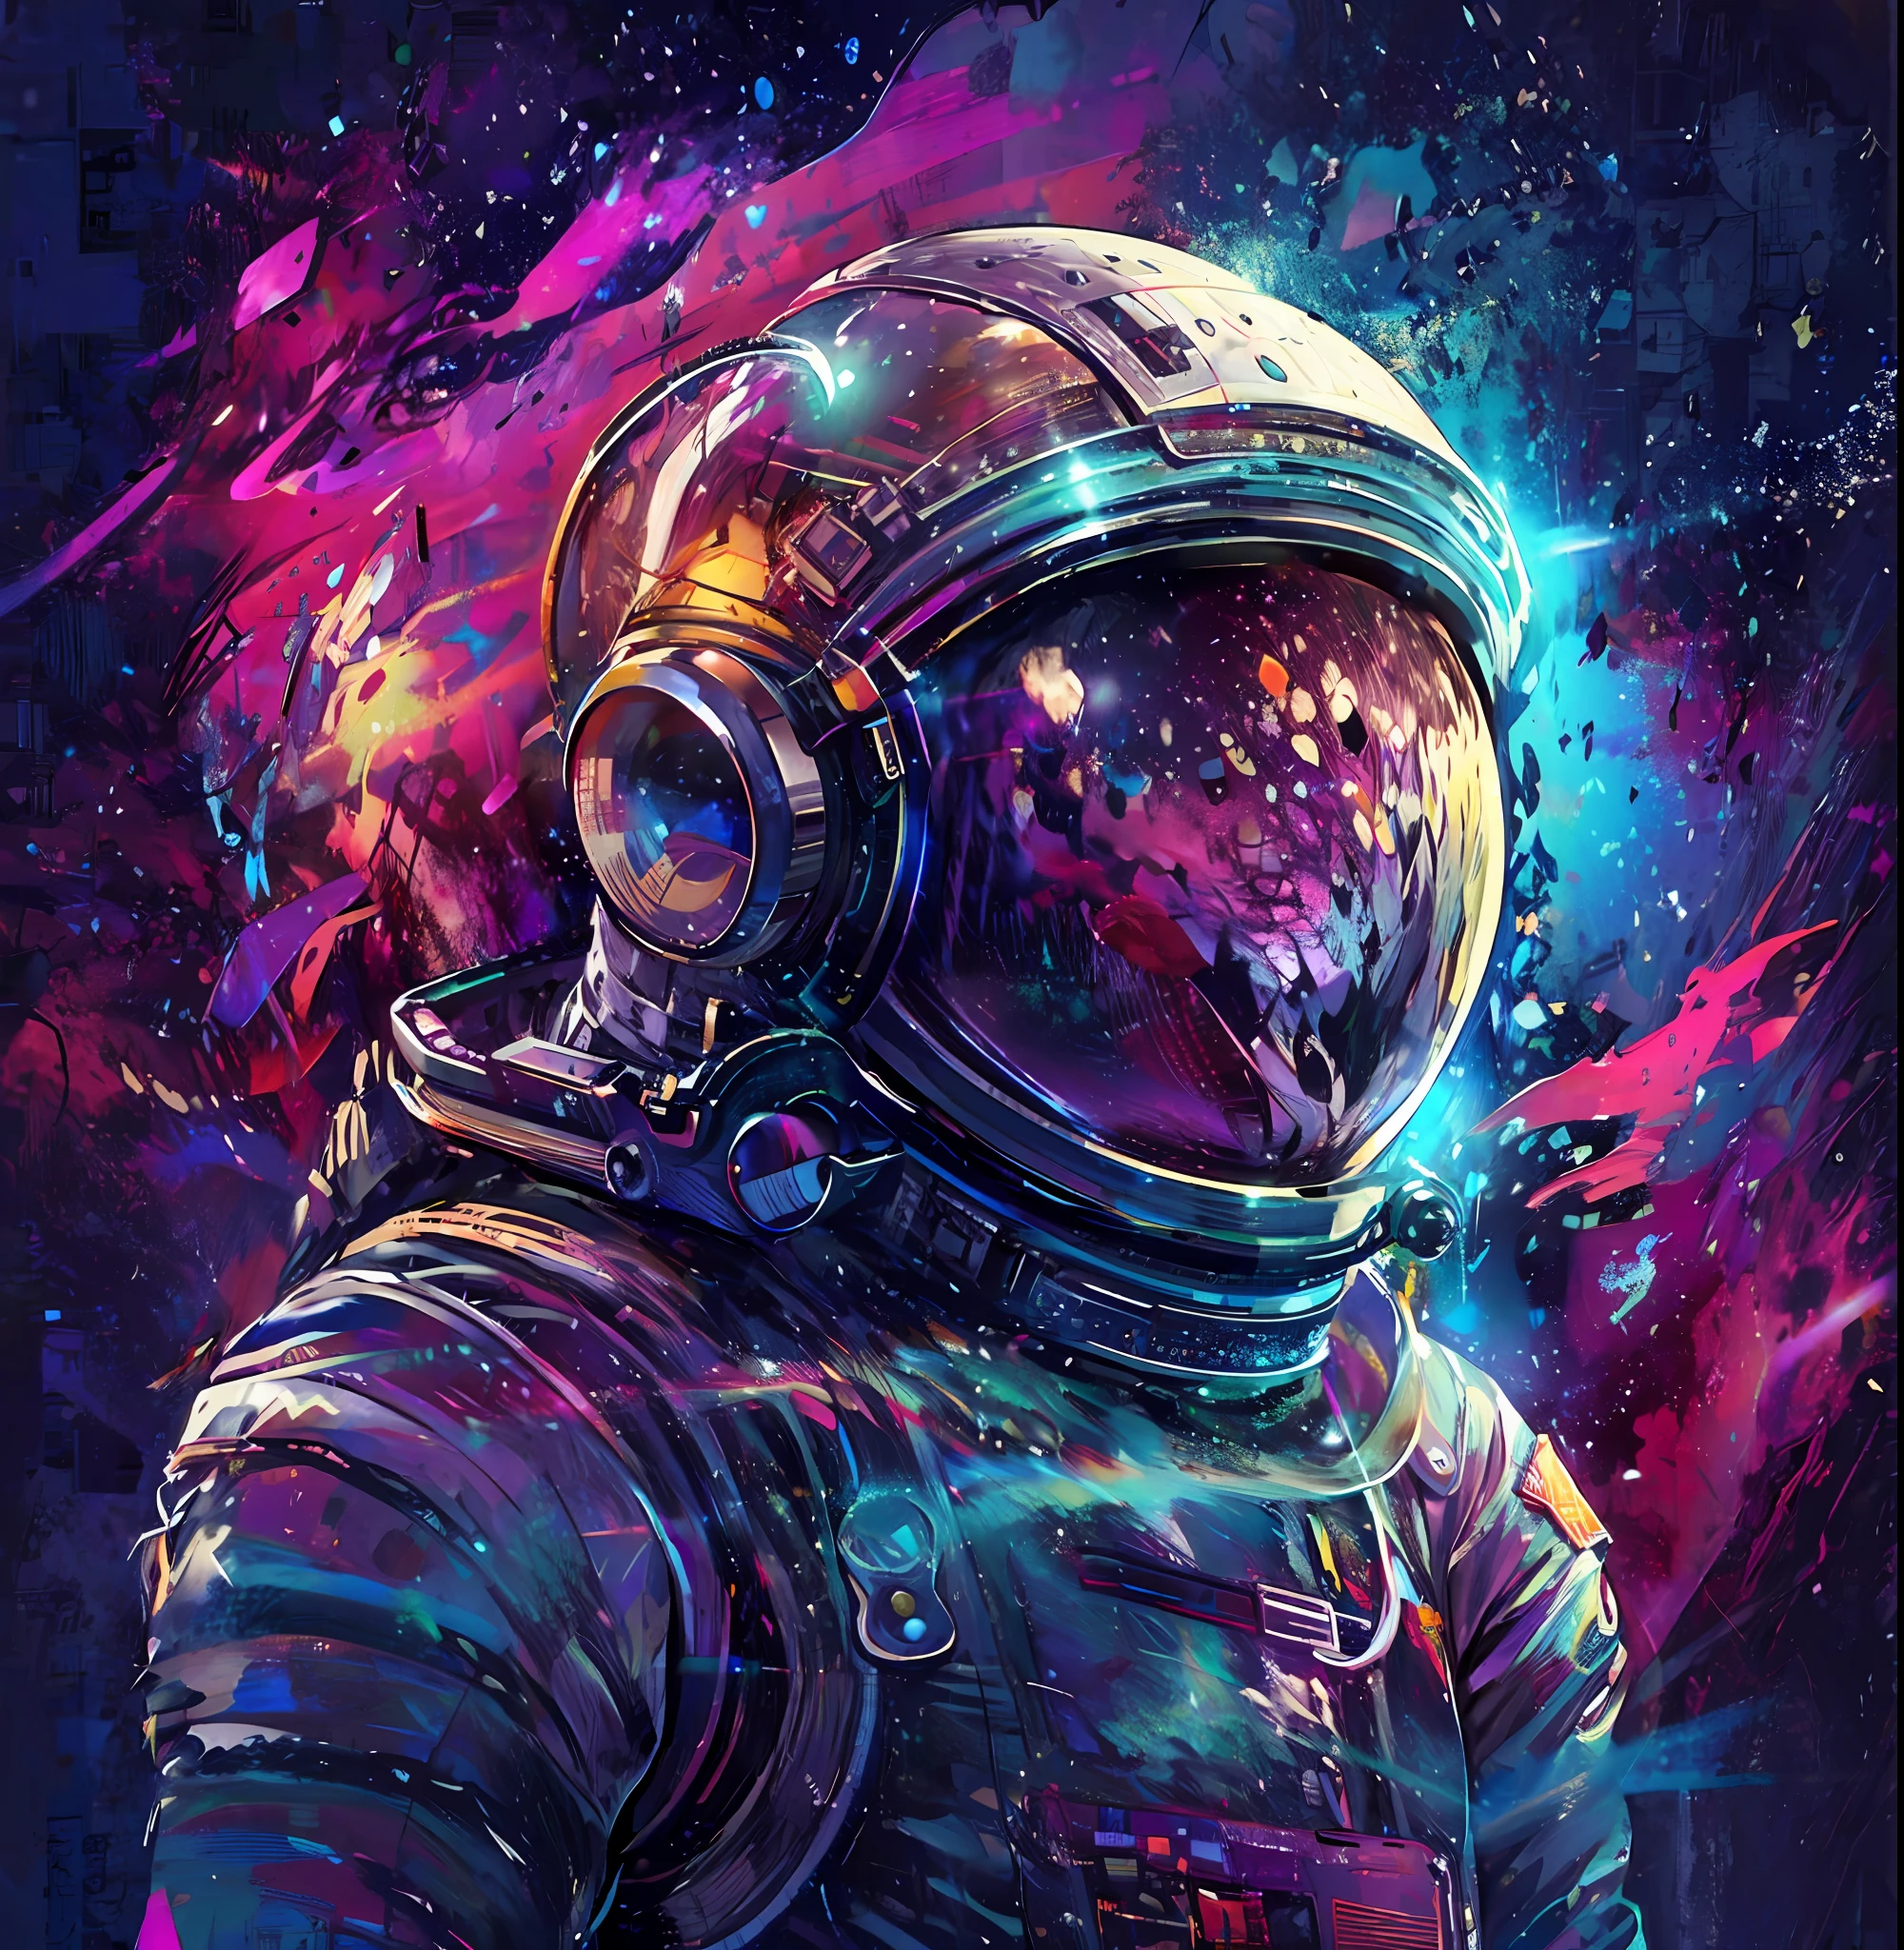 a close up of a person in a space suit with a colorful background, space colors, lone astronaut, Spaceman, space art, cosmic and colorful, cosmonaut, Retrato de um Spacemana, Spacemana detalhado, cosmic colors, paper awesome wallpaper, in spacesuit, jen bartel, in space, full of colors and rich detail, Retrato do Spacemana, Spacemana futurista